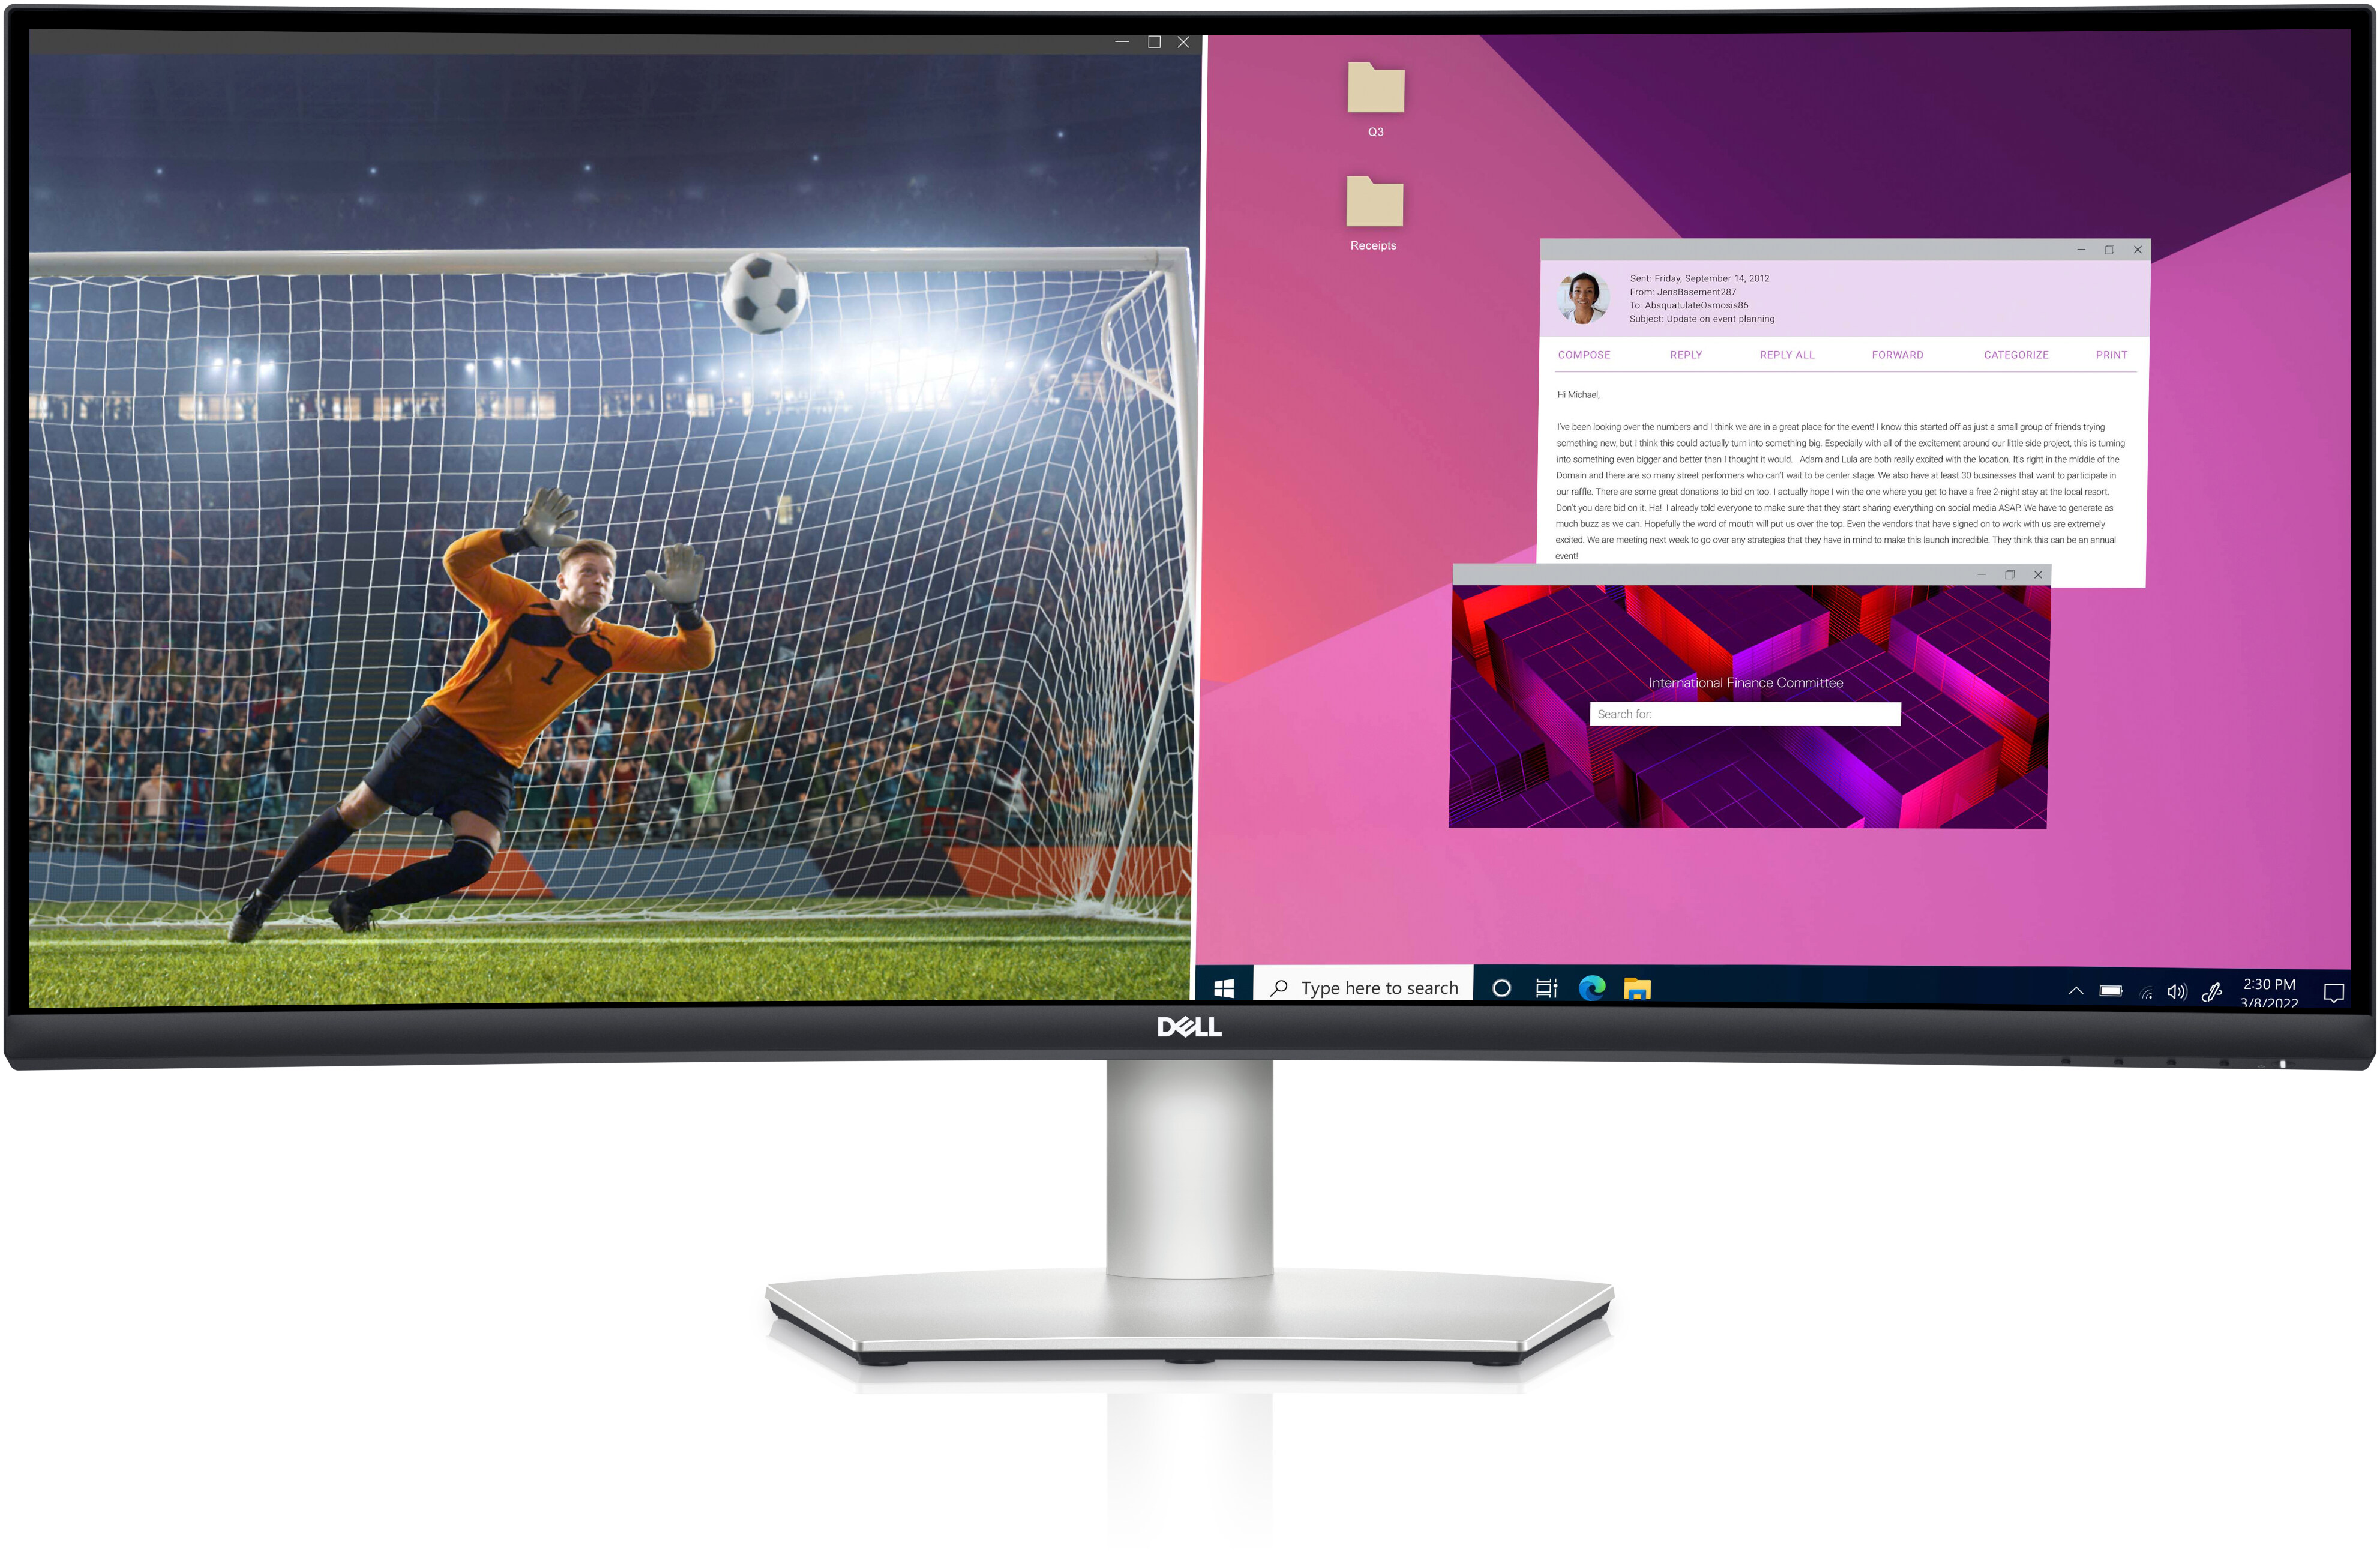 https://i.dell.com/is/image/DellContent/content/dam/ss2/product-images/peripherals/monitors/s3423dwc/media-gallery/monitor-s3423dwc-gray-gallery-2.psd?fmt=pjpg&pscan=auto&scl=1&wid=3966&hei=2601&qlt=100,1&resMode=sharp2&size=3966,2601&chrss=full&imwidth=5000